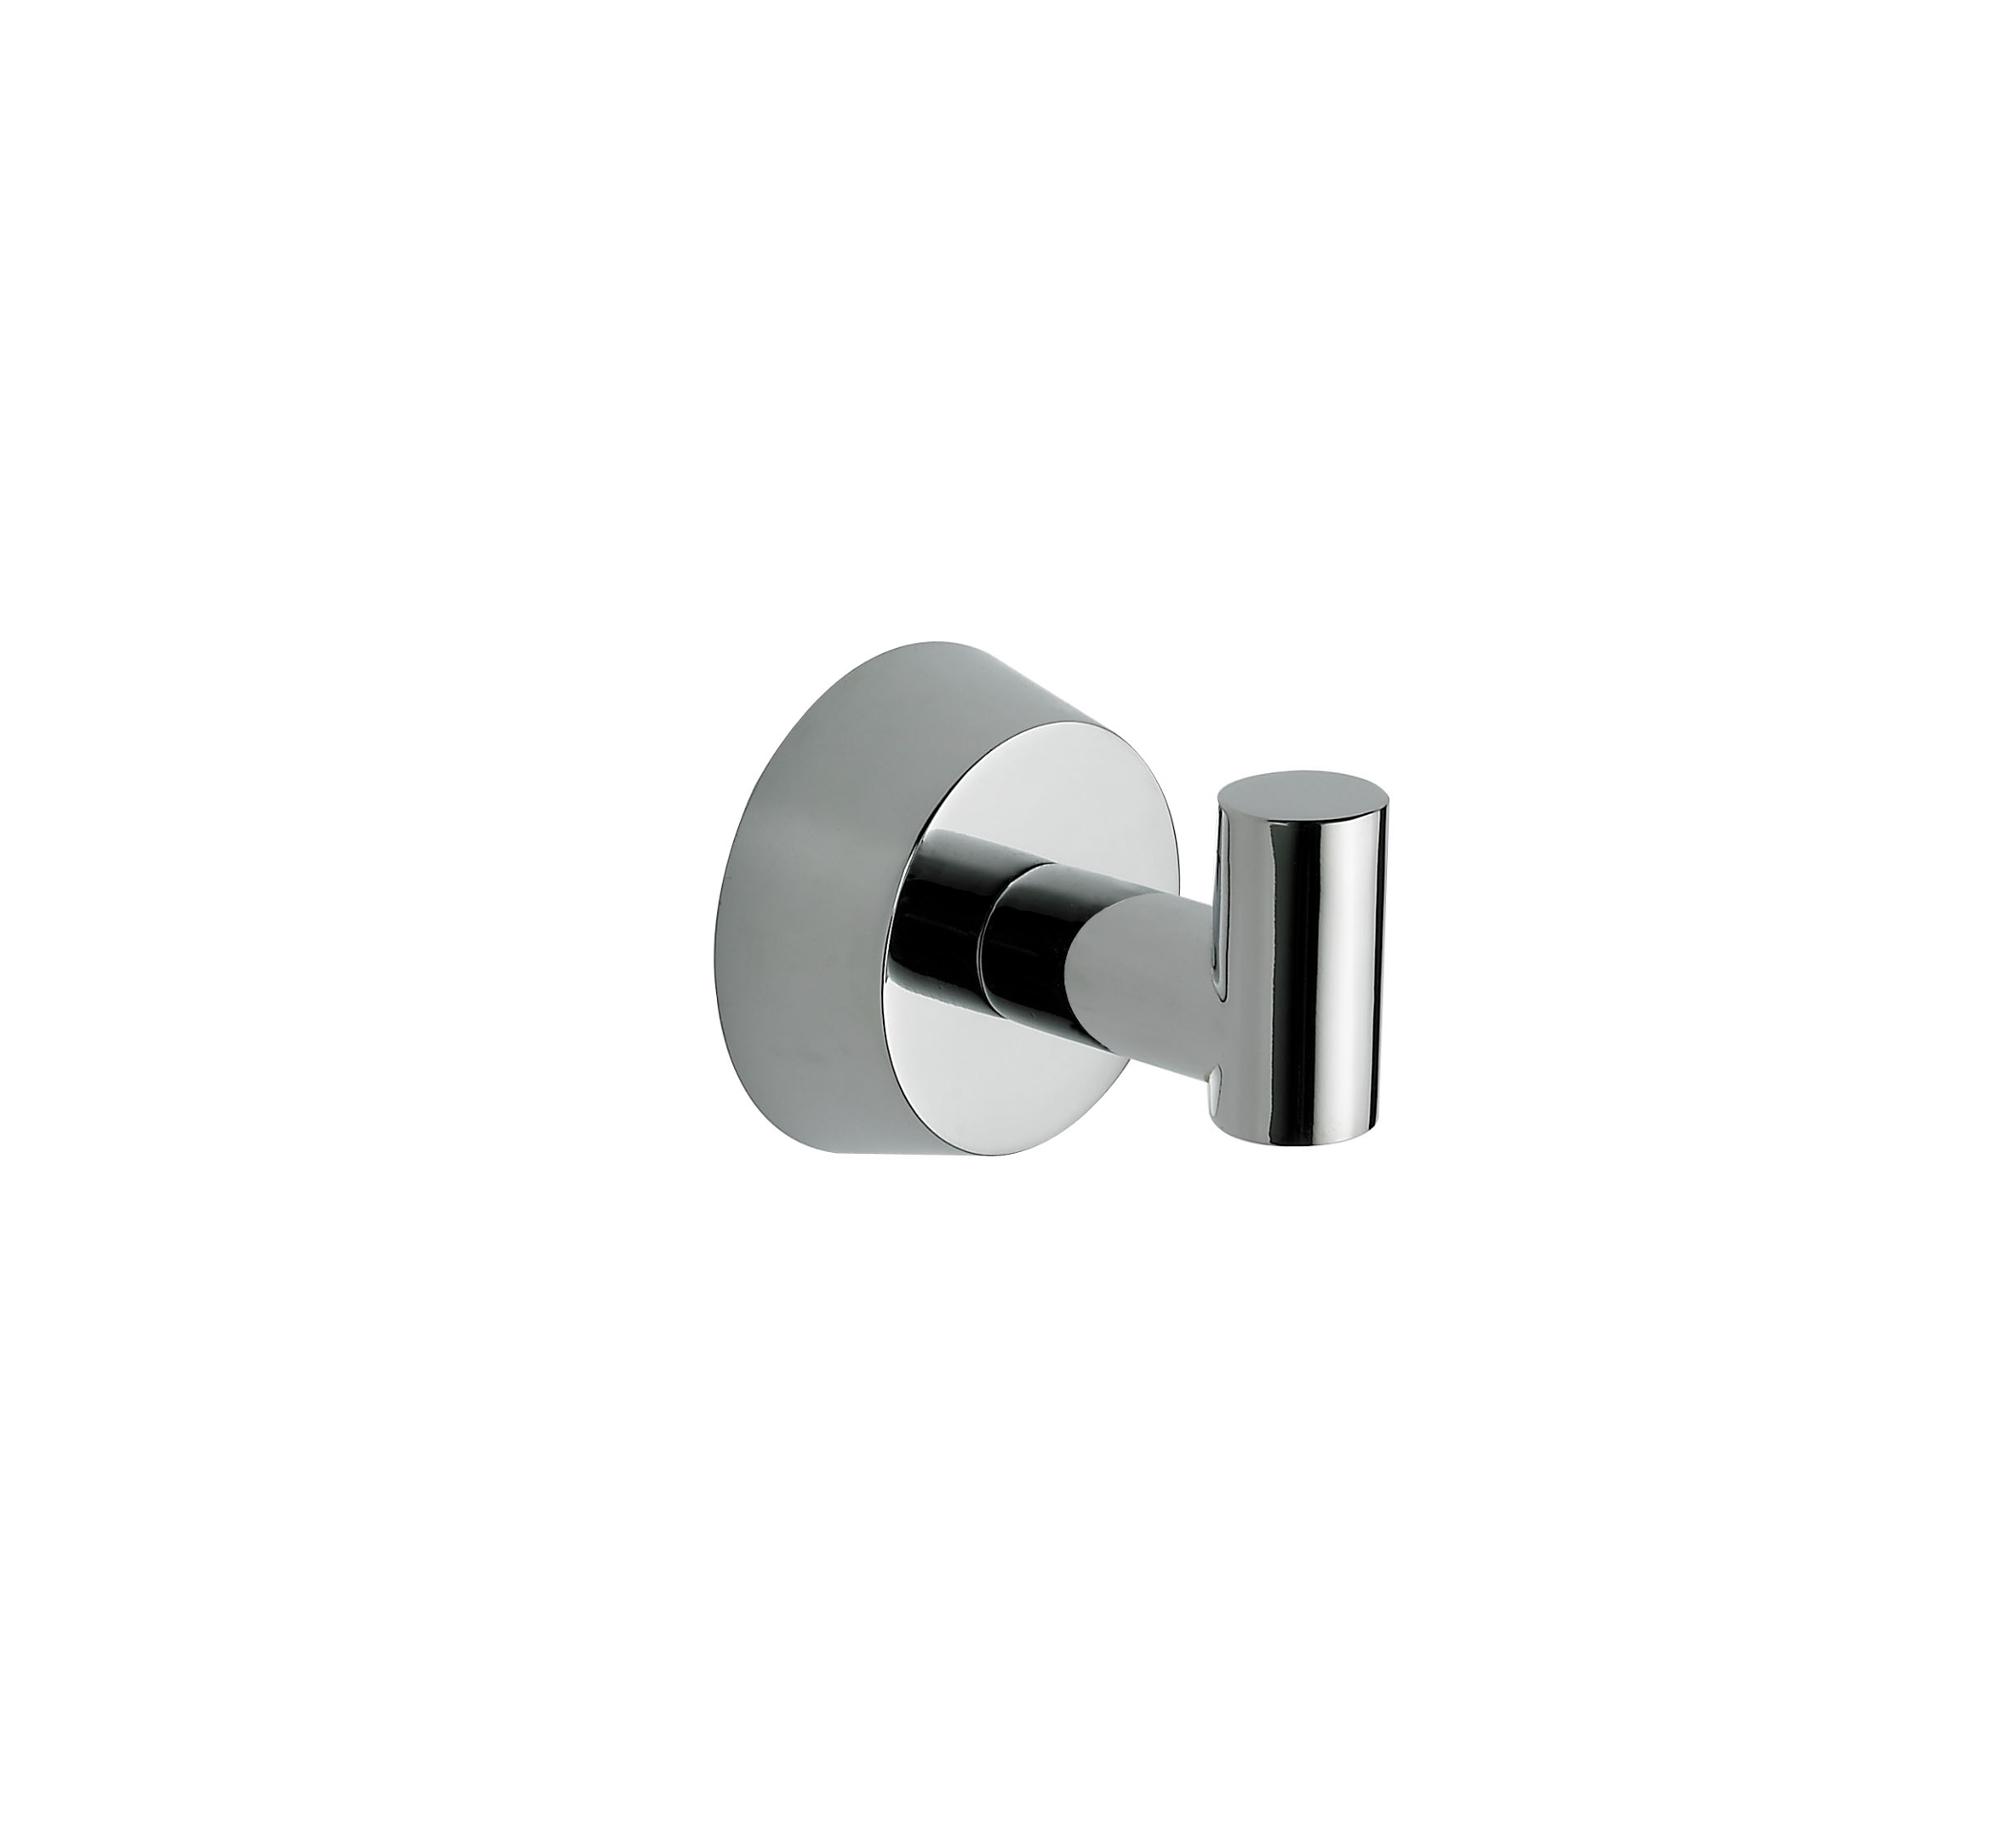 High End Latest Style Hot Sale Bathroom Accessories Metal Wall Mounted Chrome Robe Hook 1608 Featured Image